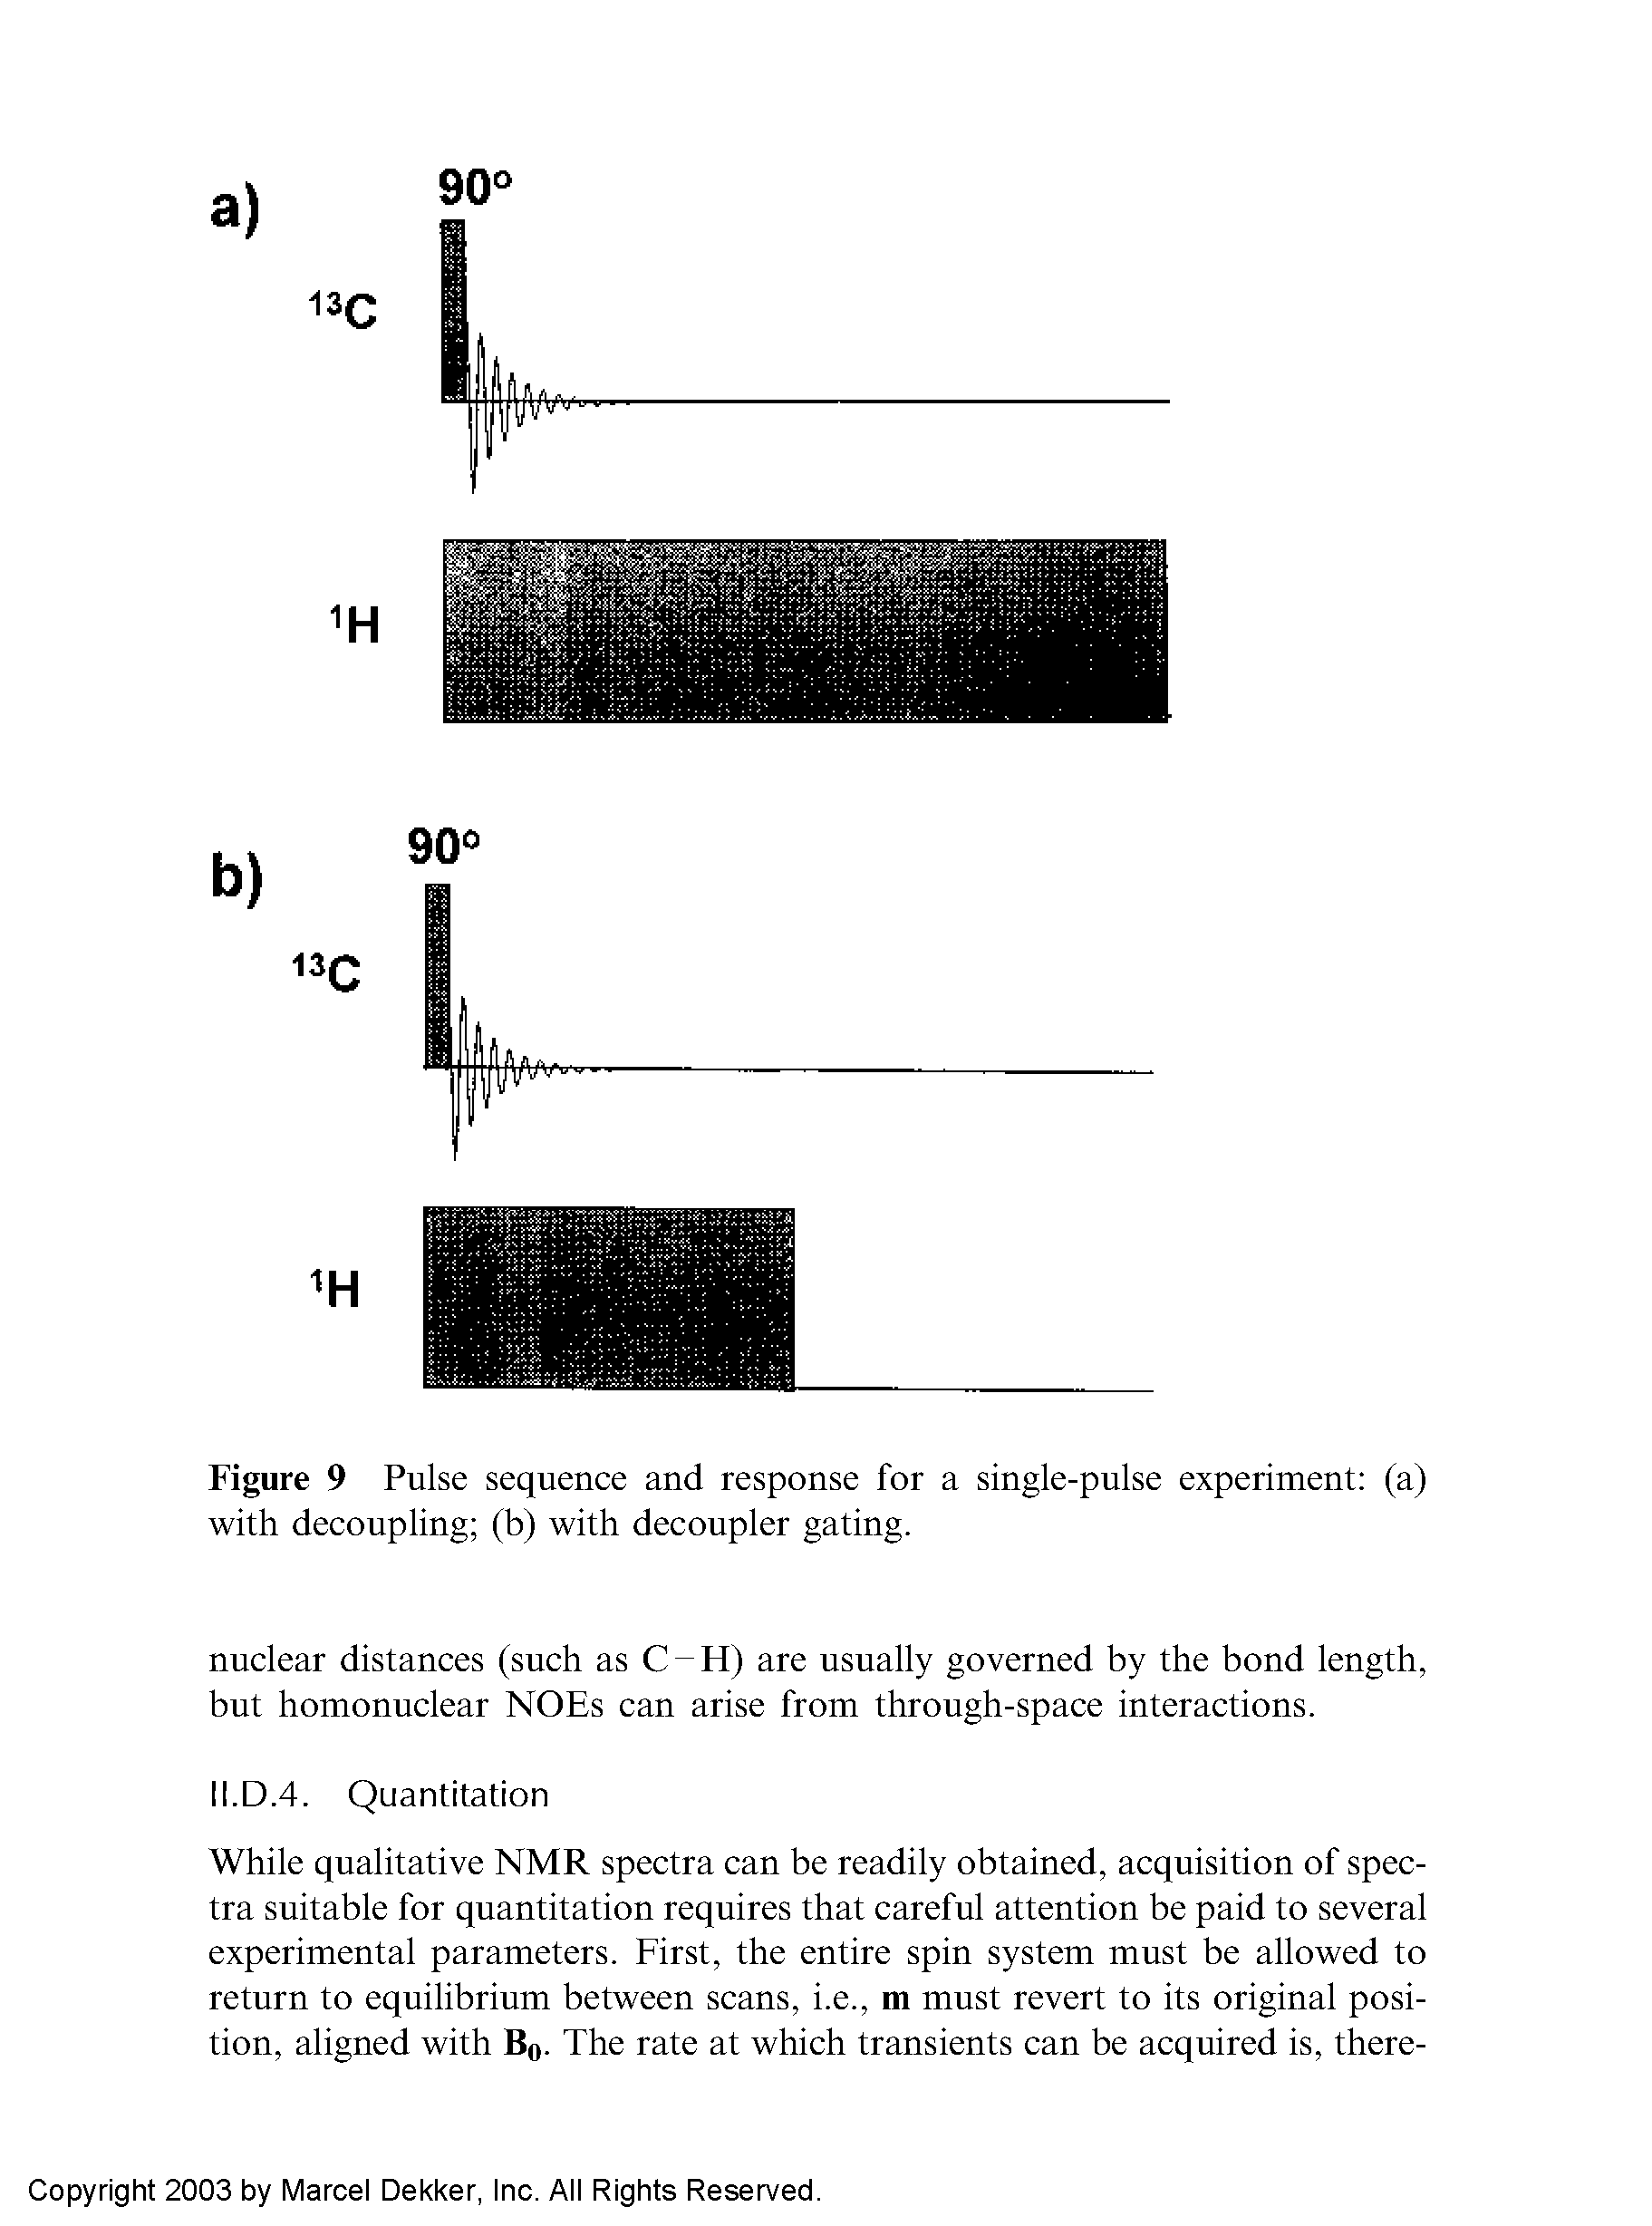 Figure 9 Pulse sequence and response for a single-pulse experiment (a) with decoupling (b) with decoupler gating.